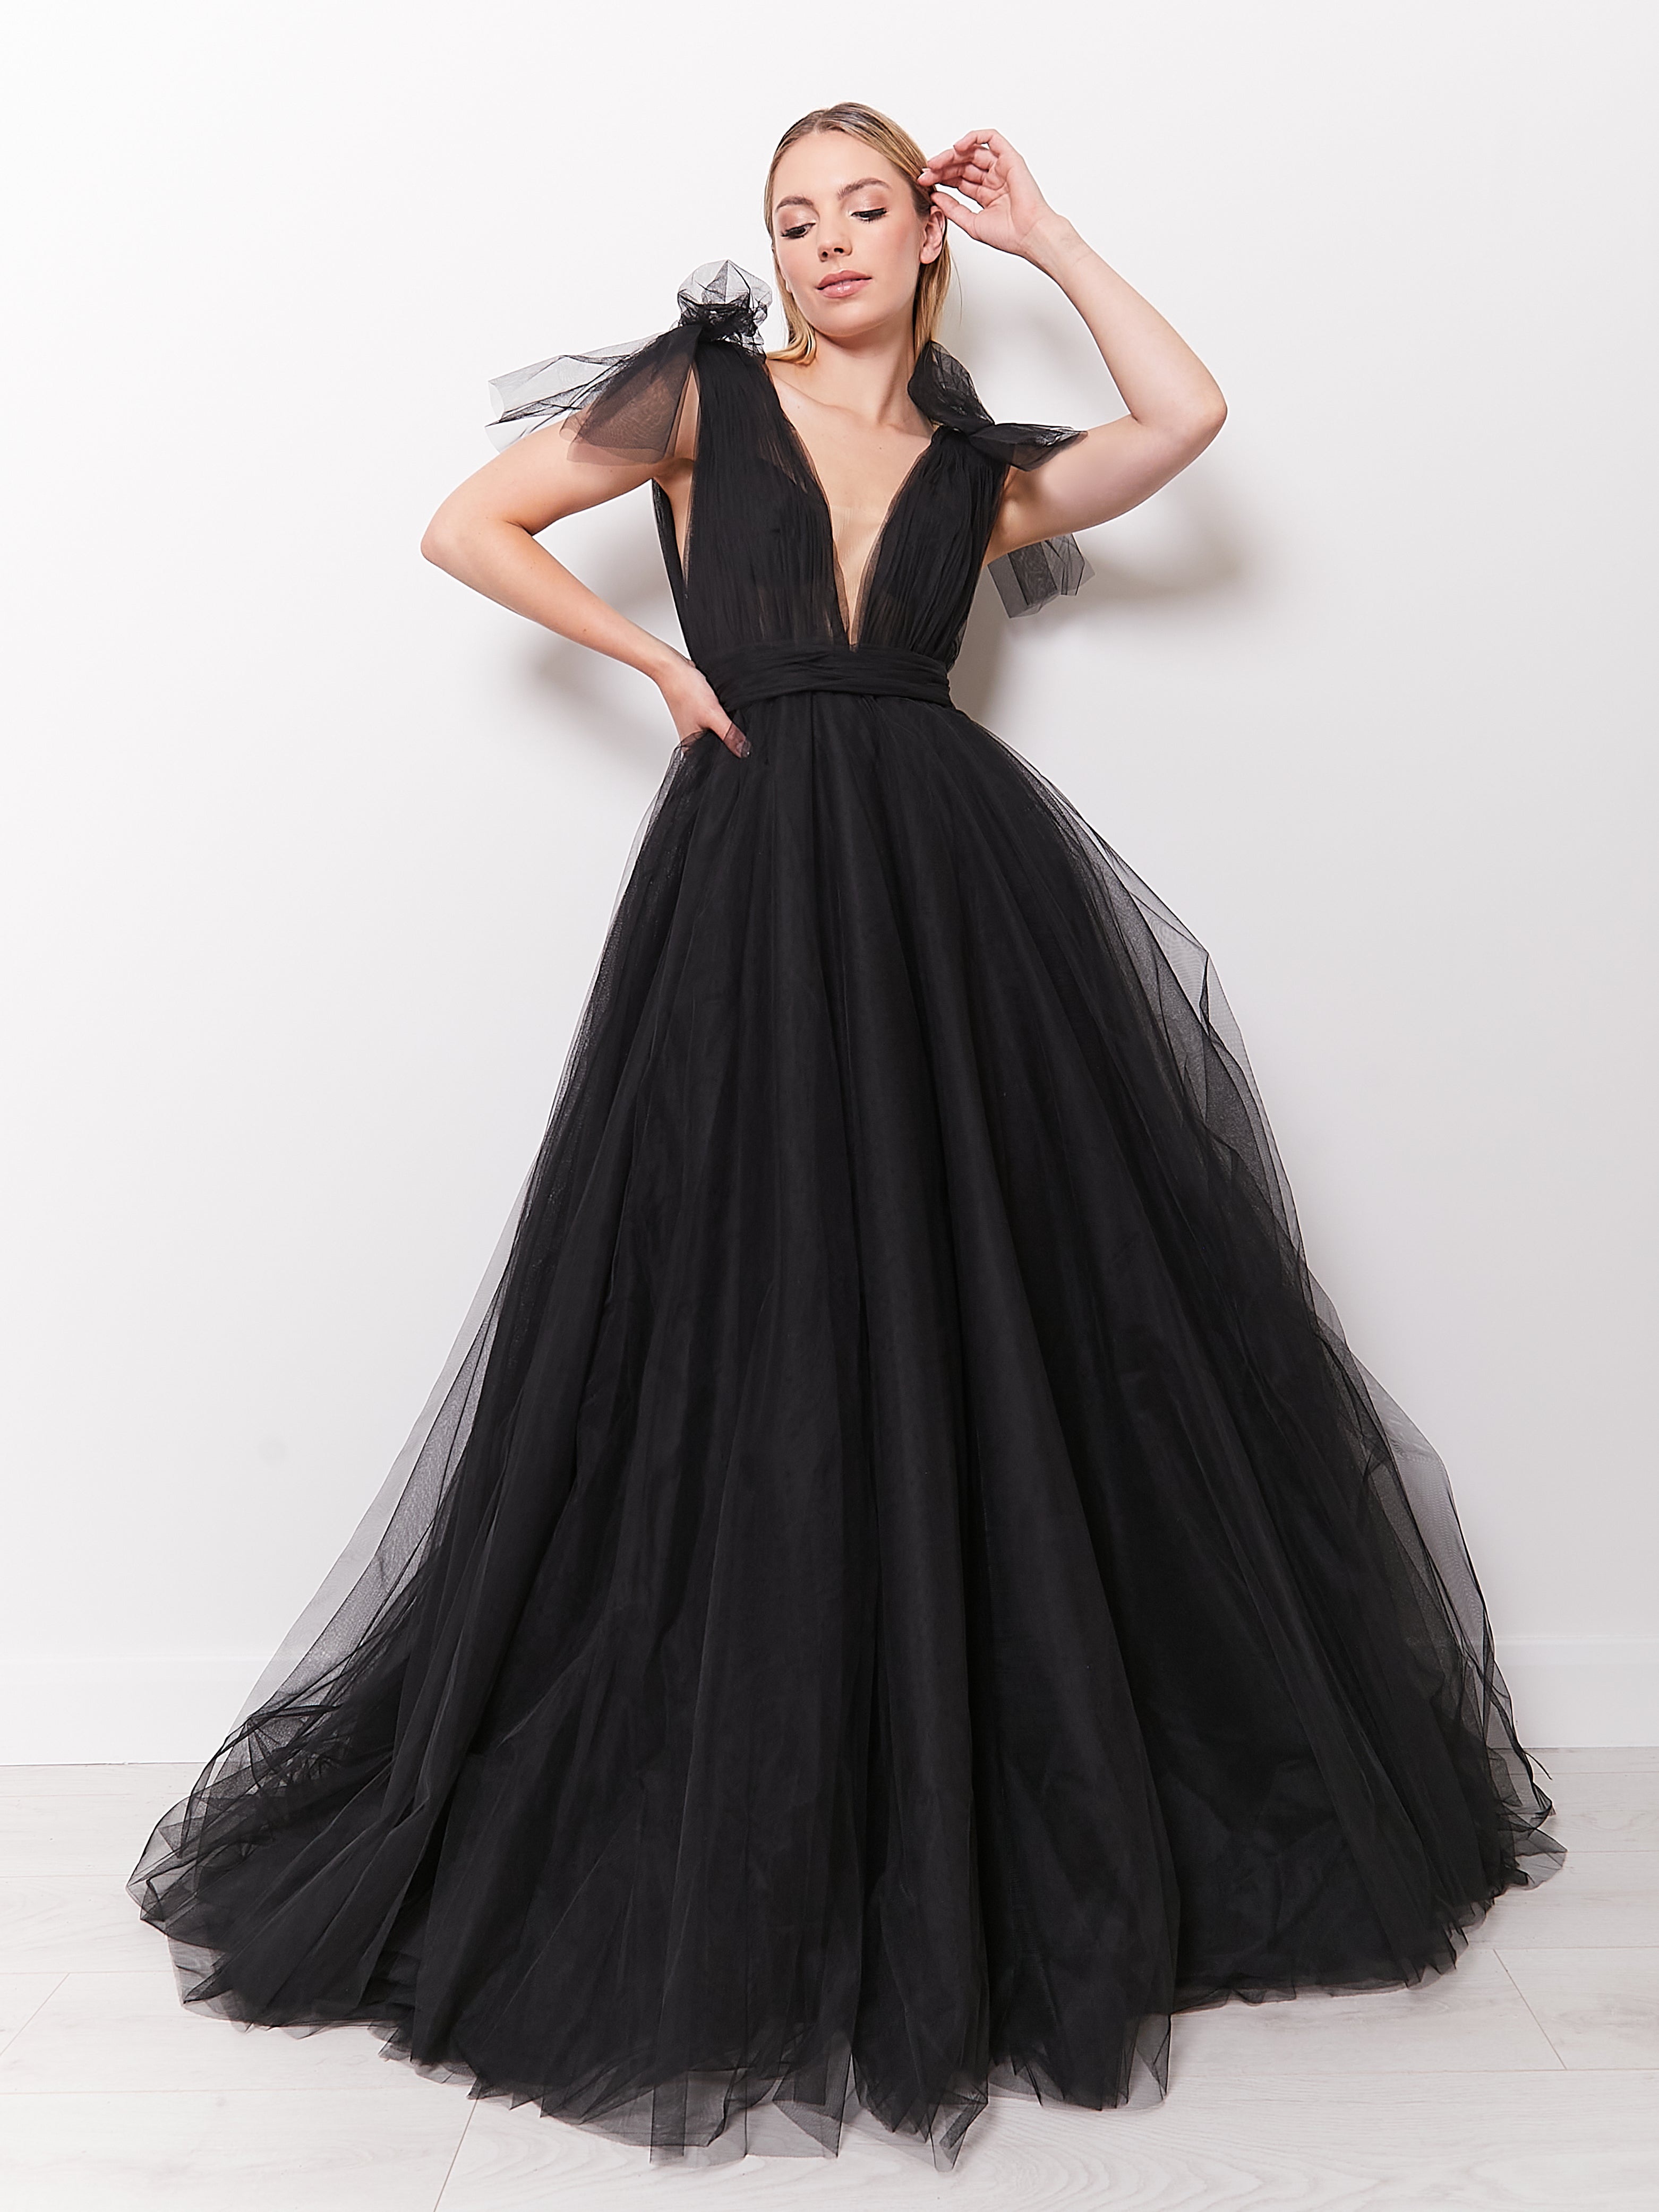 Trending black color party wear gown for wedding reception – Joshindia